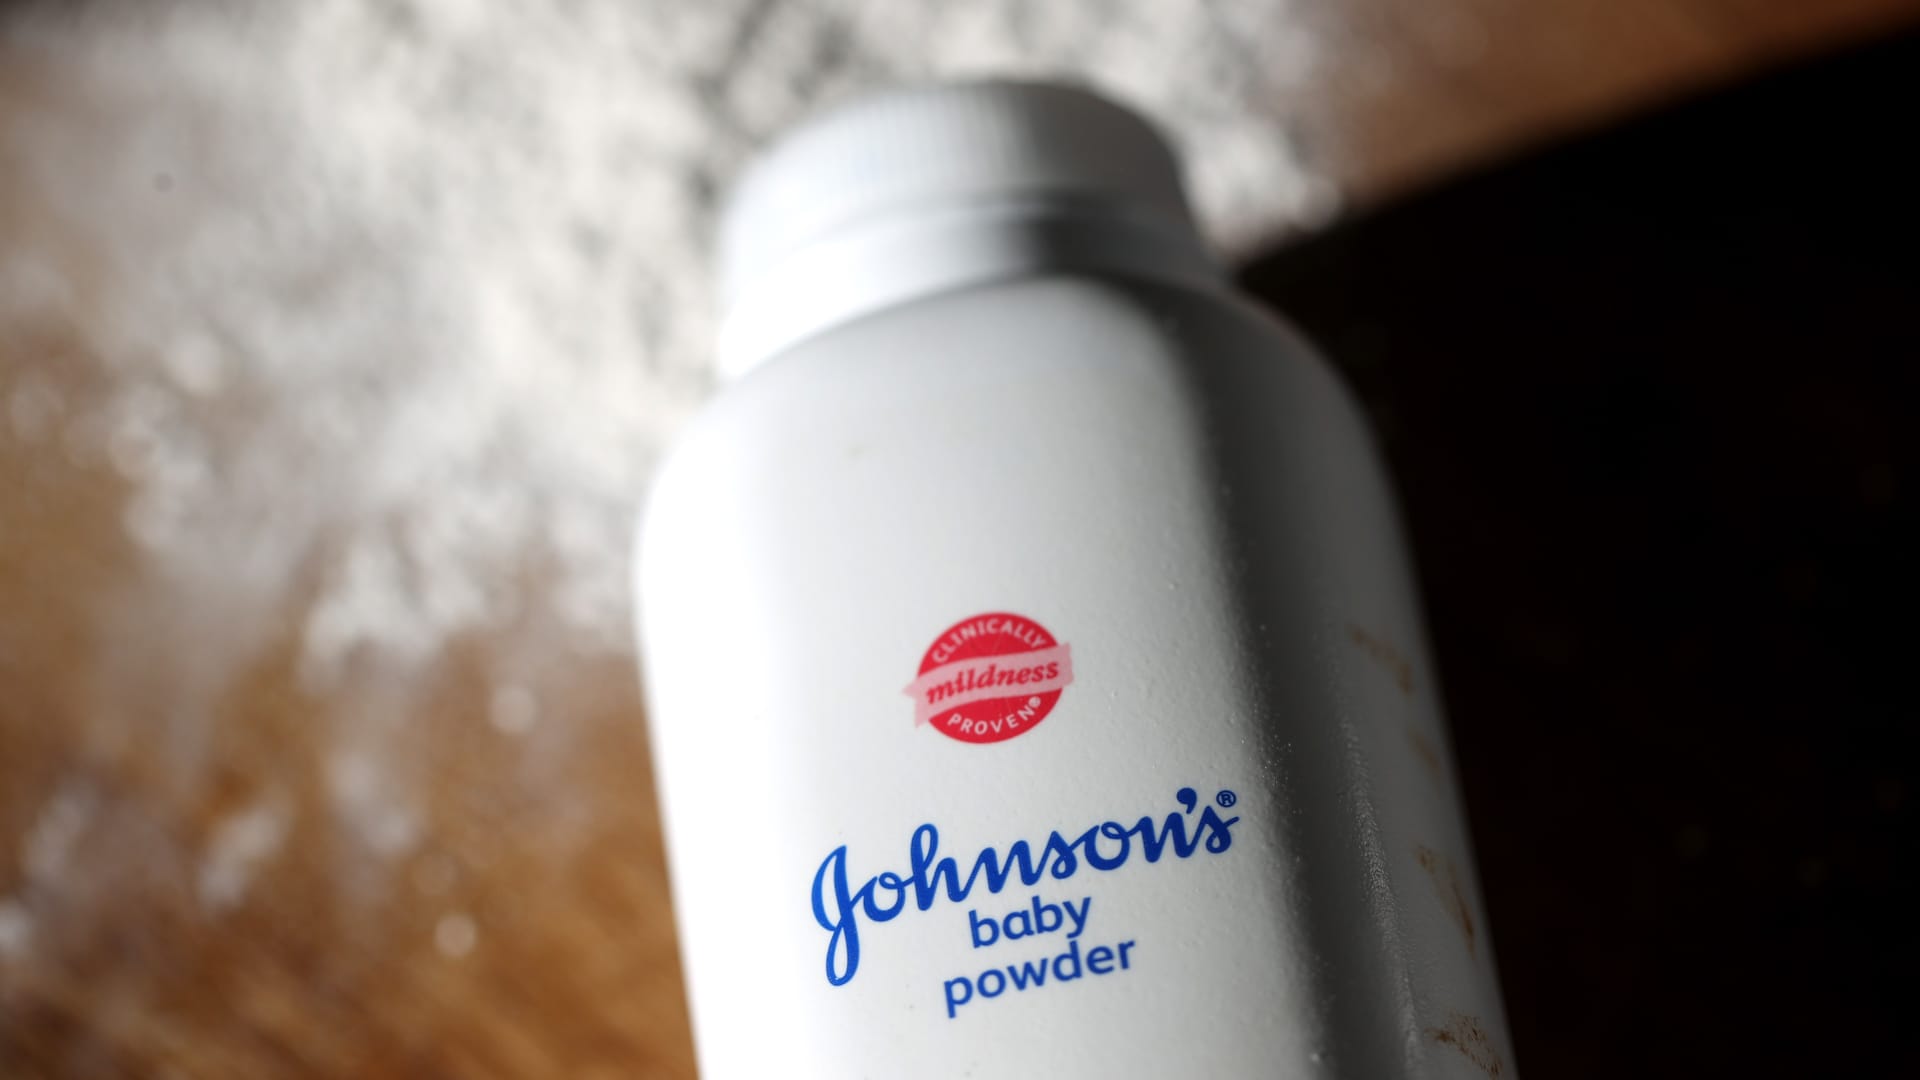 Johnson & Johnson shares rise after company proposes baby powder cancer settlement